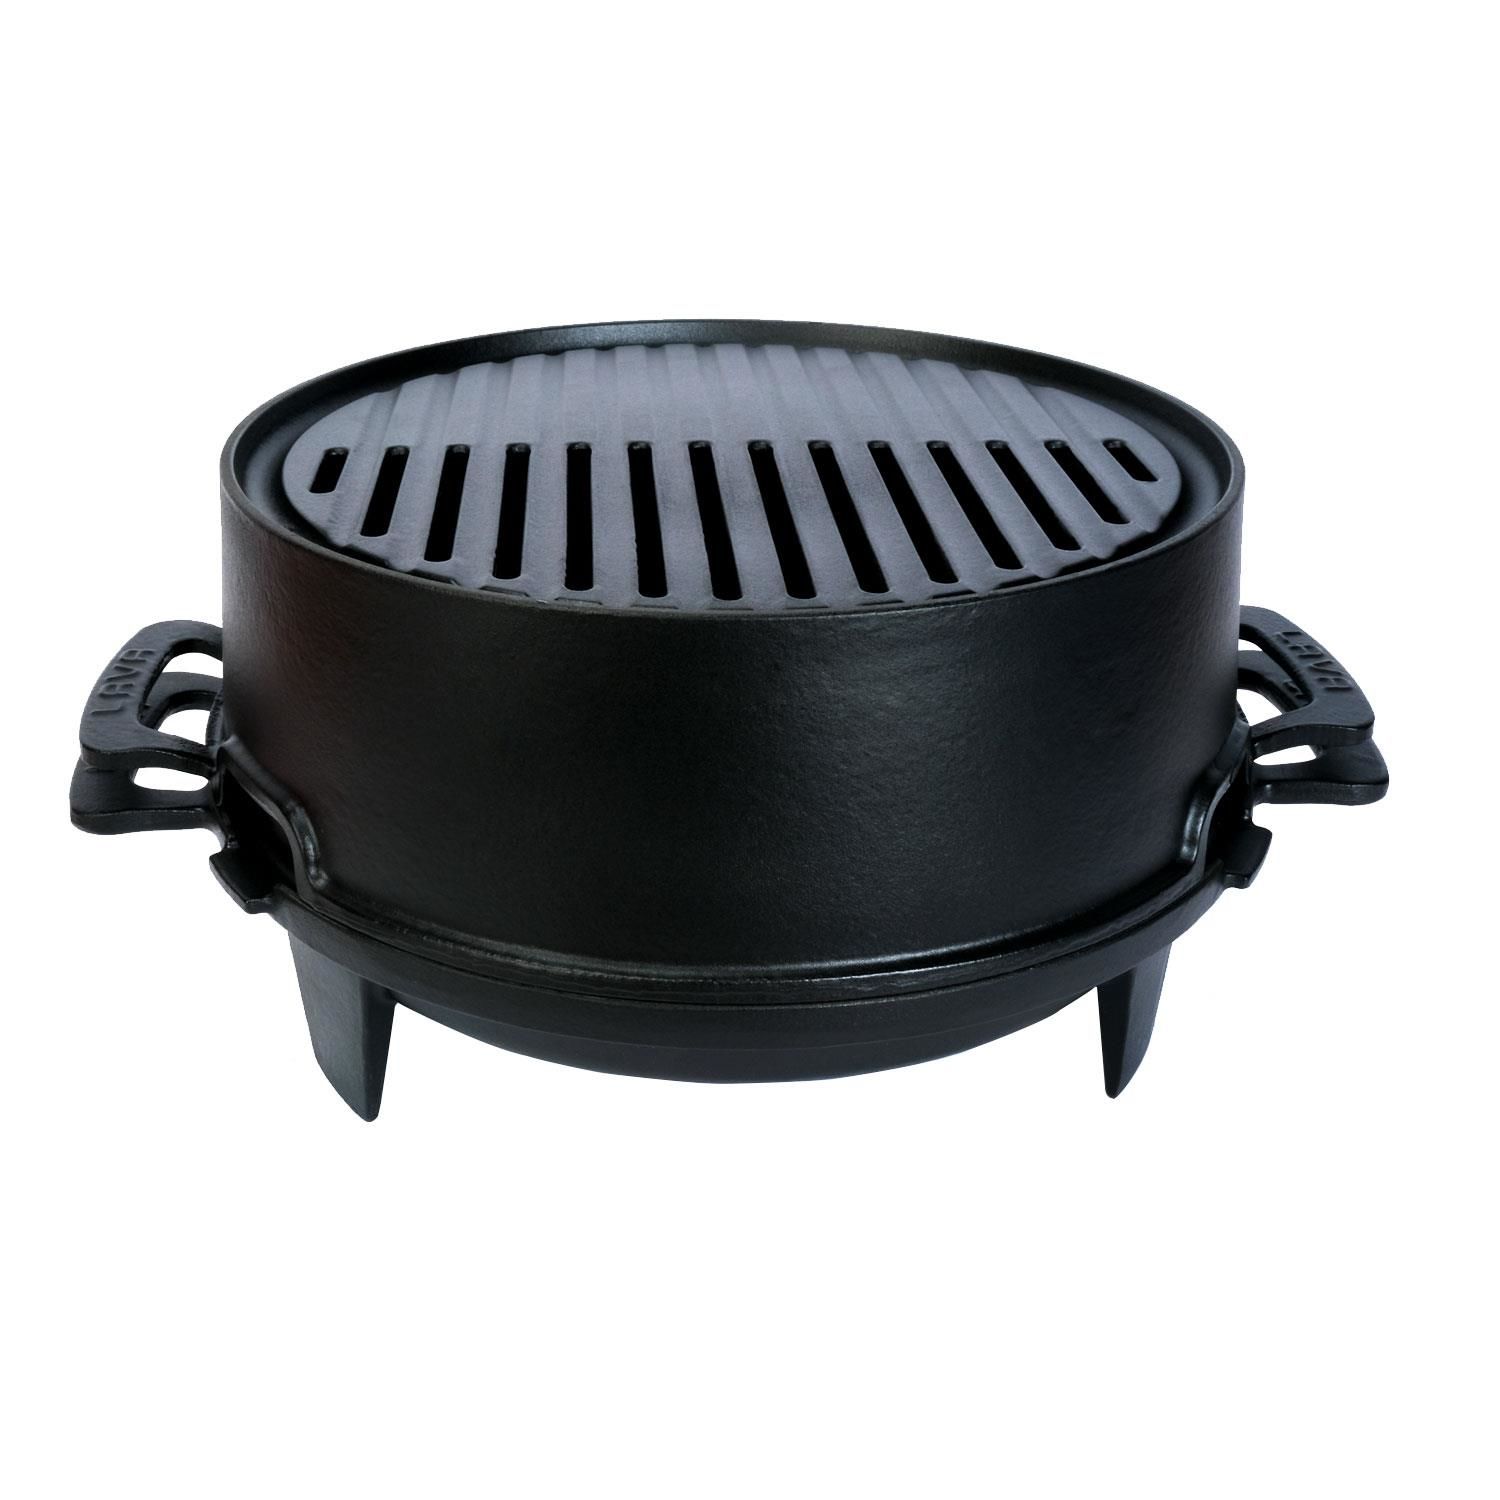 Lava Casting Round Barbecue Grill Set Cast Iron Solid Double Handle Diameter (Ø)36 cm.